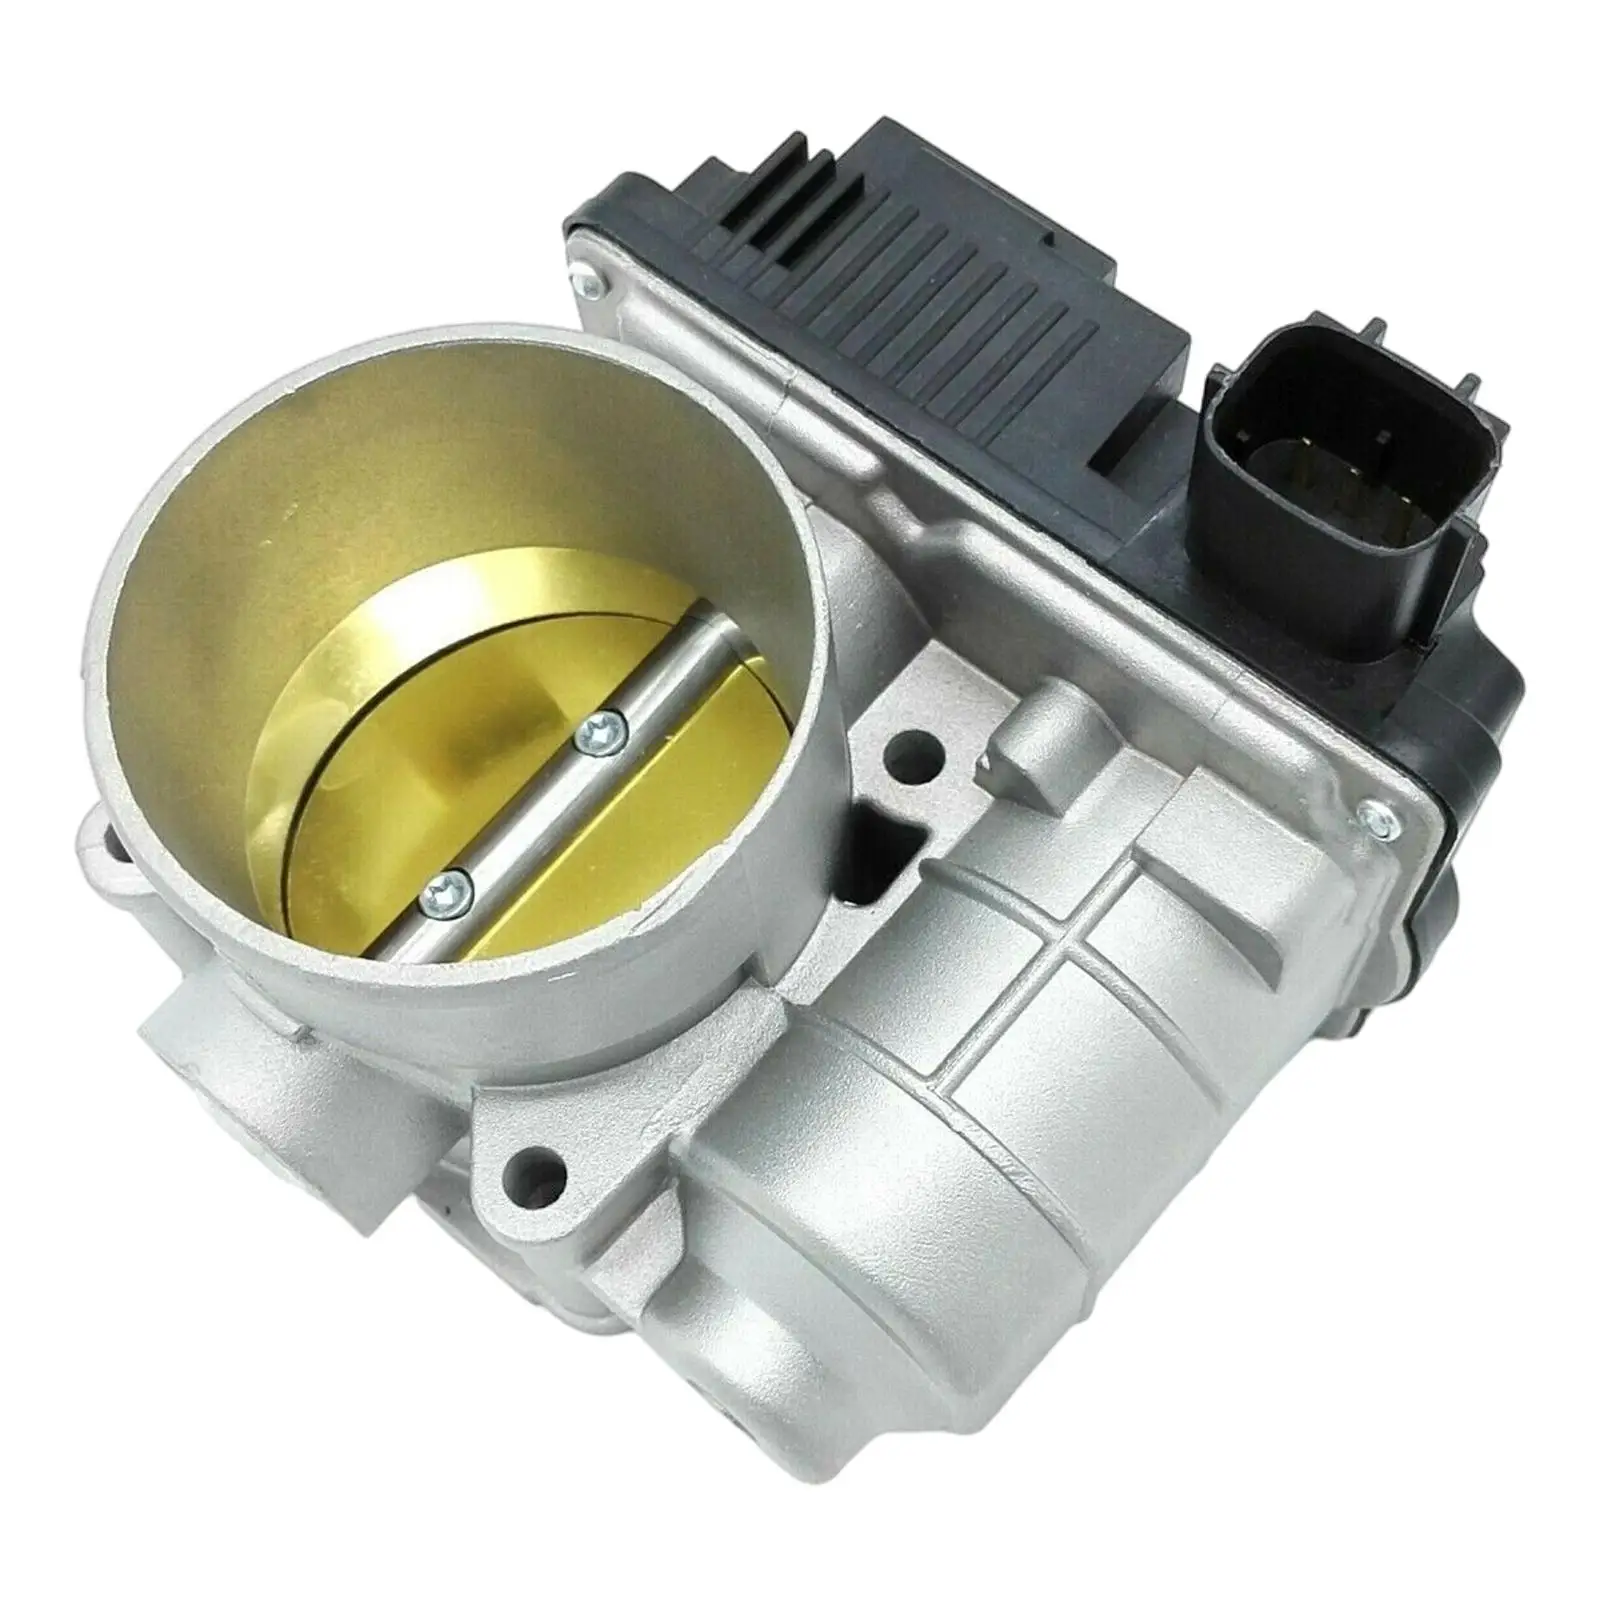 16119-AE013 Throttle Body Fuel Injection Electronic Assembly for Altima L4 2.5L Idle Air Control Sensor Fit for  Car Parts